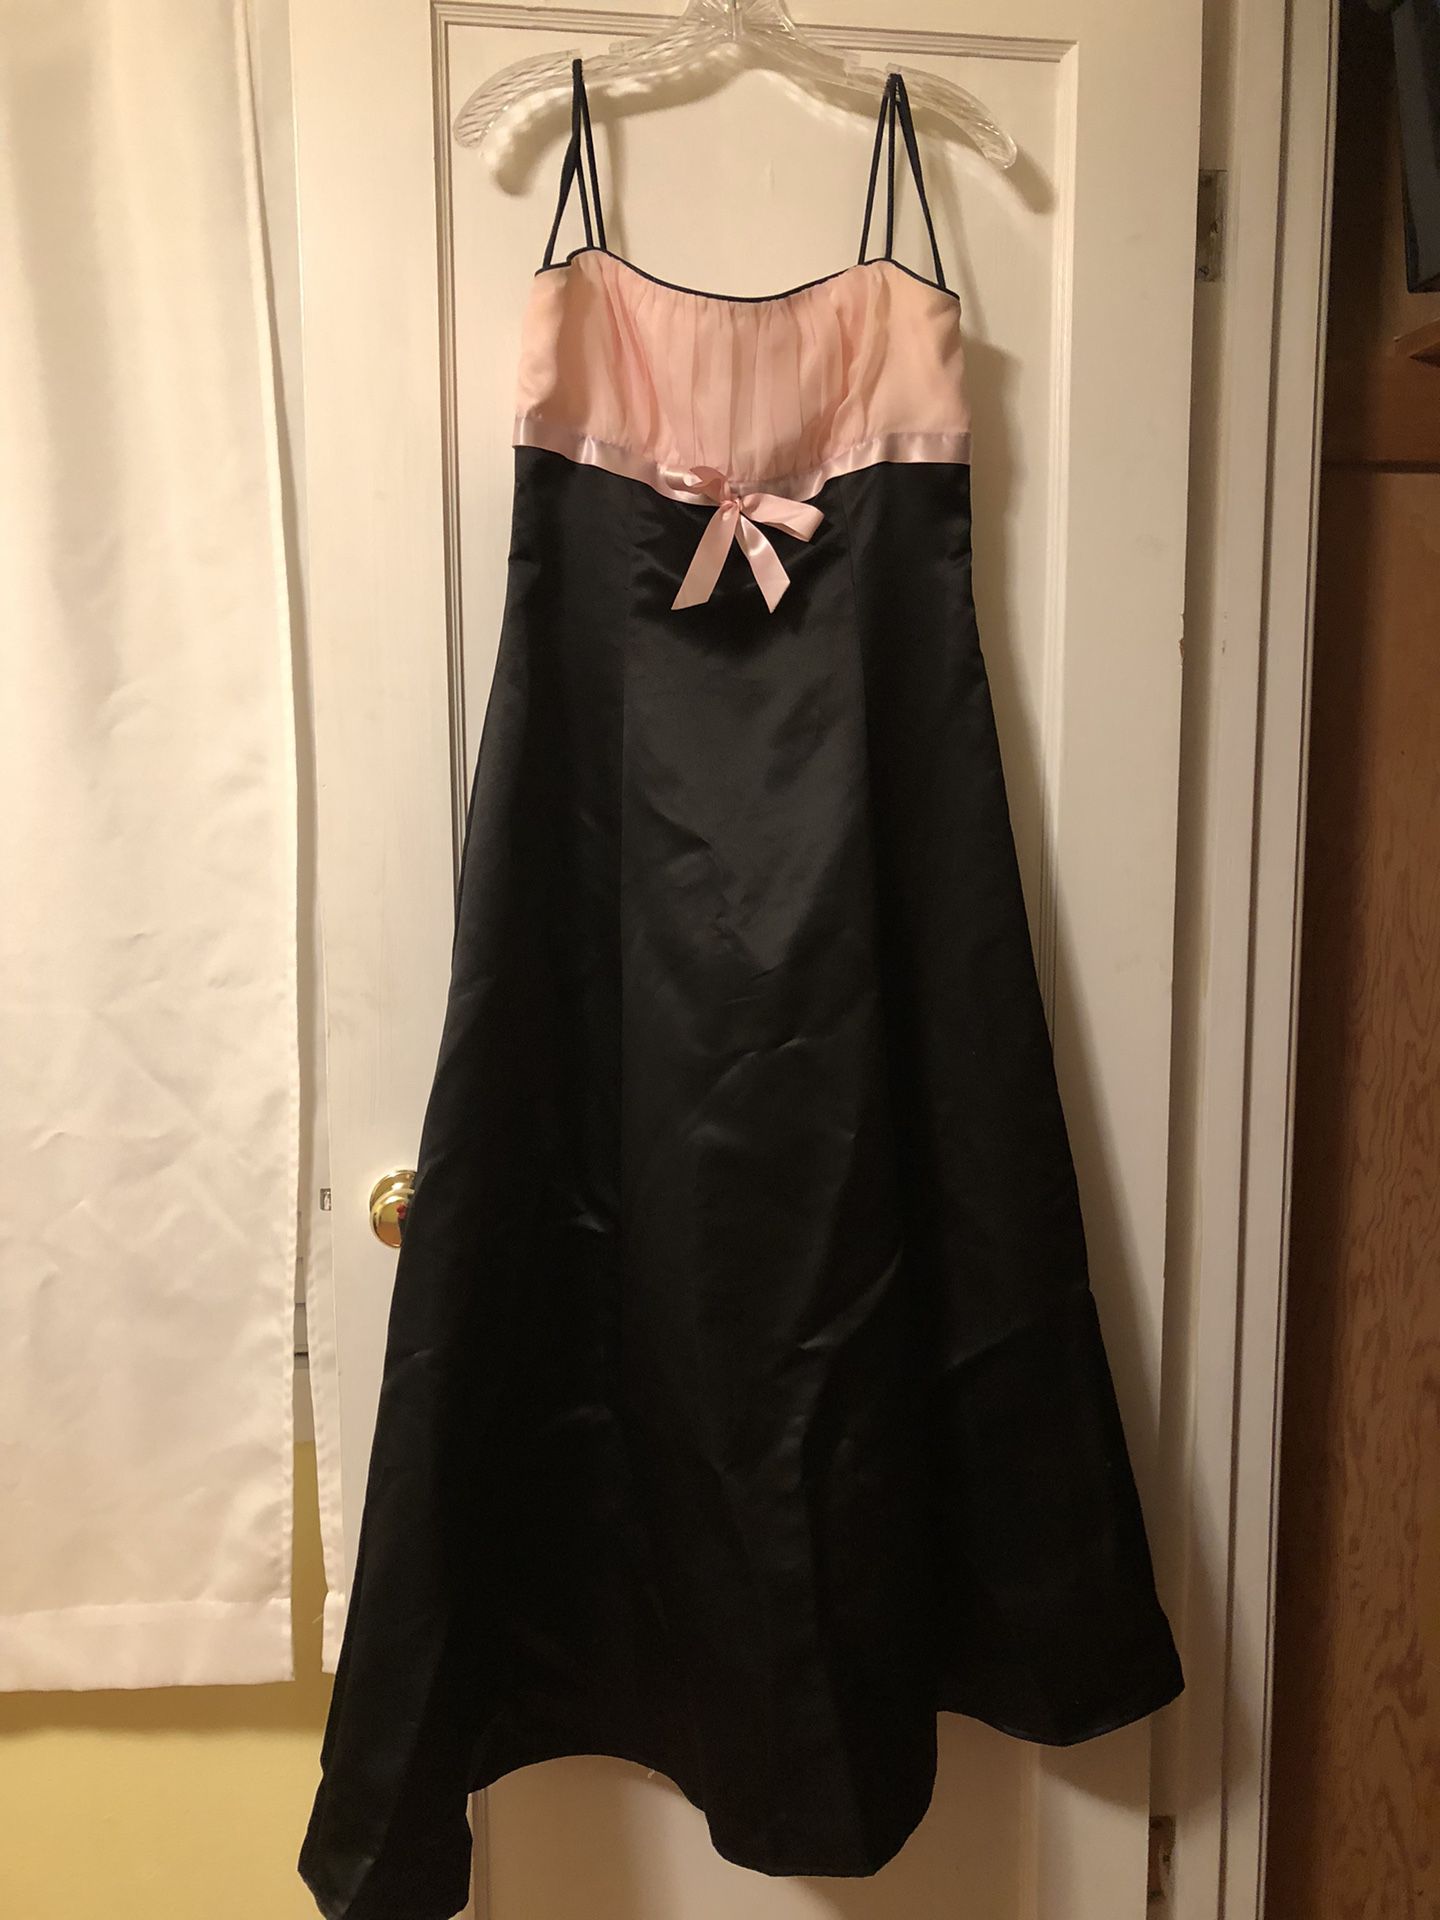 Pink and Black Satin Formal Dress With Straps Size M